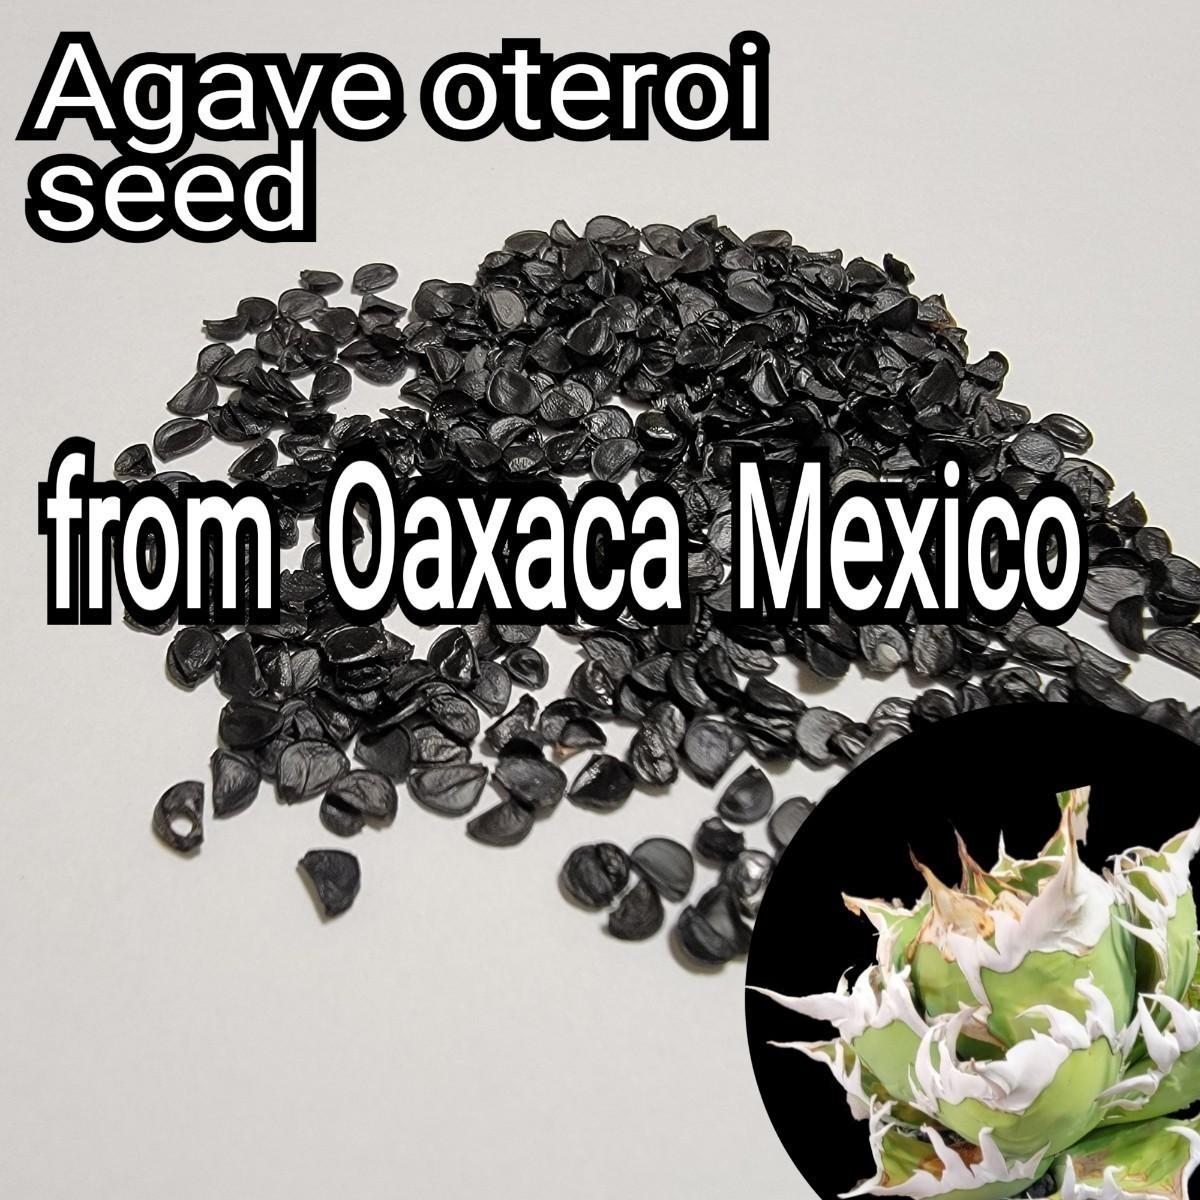 Agave oteroiseed from Oaxaca Mexico seeds [10 bead ] good .. carefuly selected freshness. is good kind therefore germination proportion . high! certainly, real raw . Challenge please 